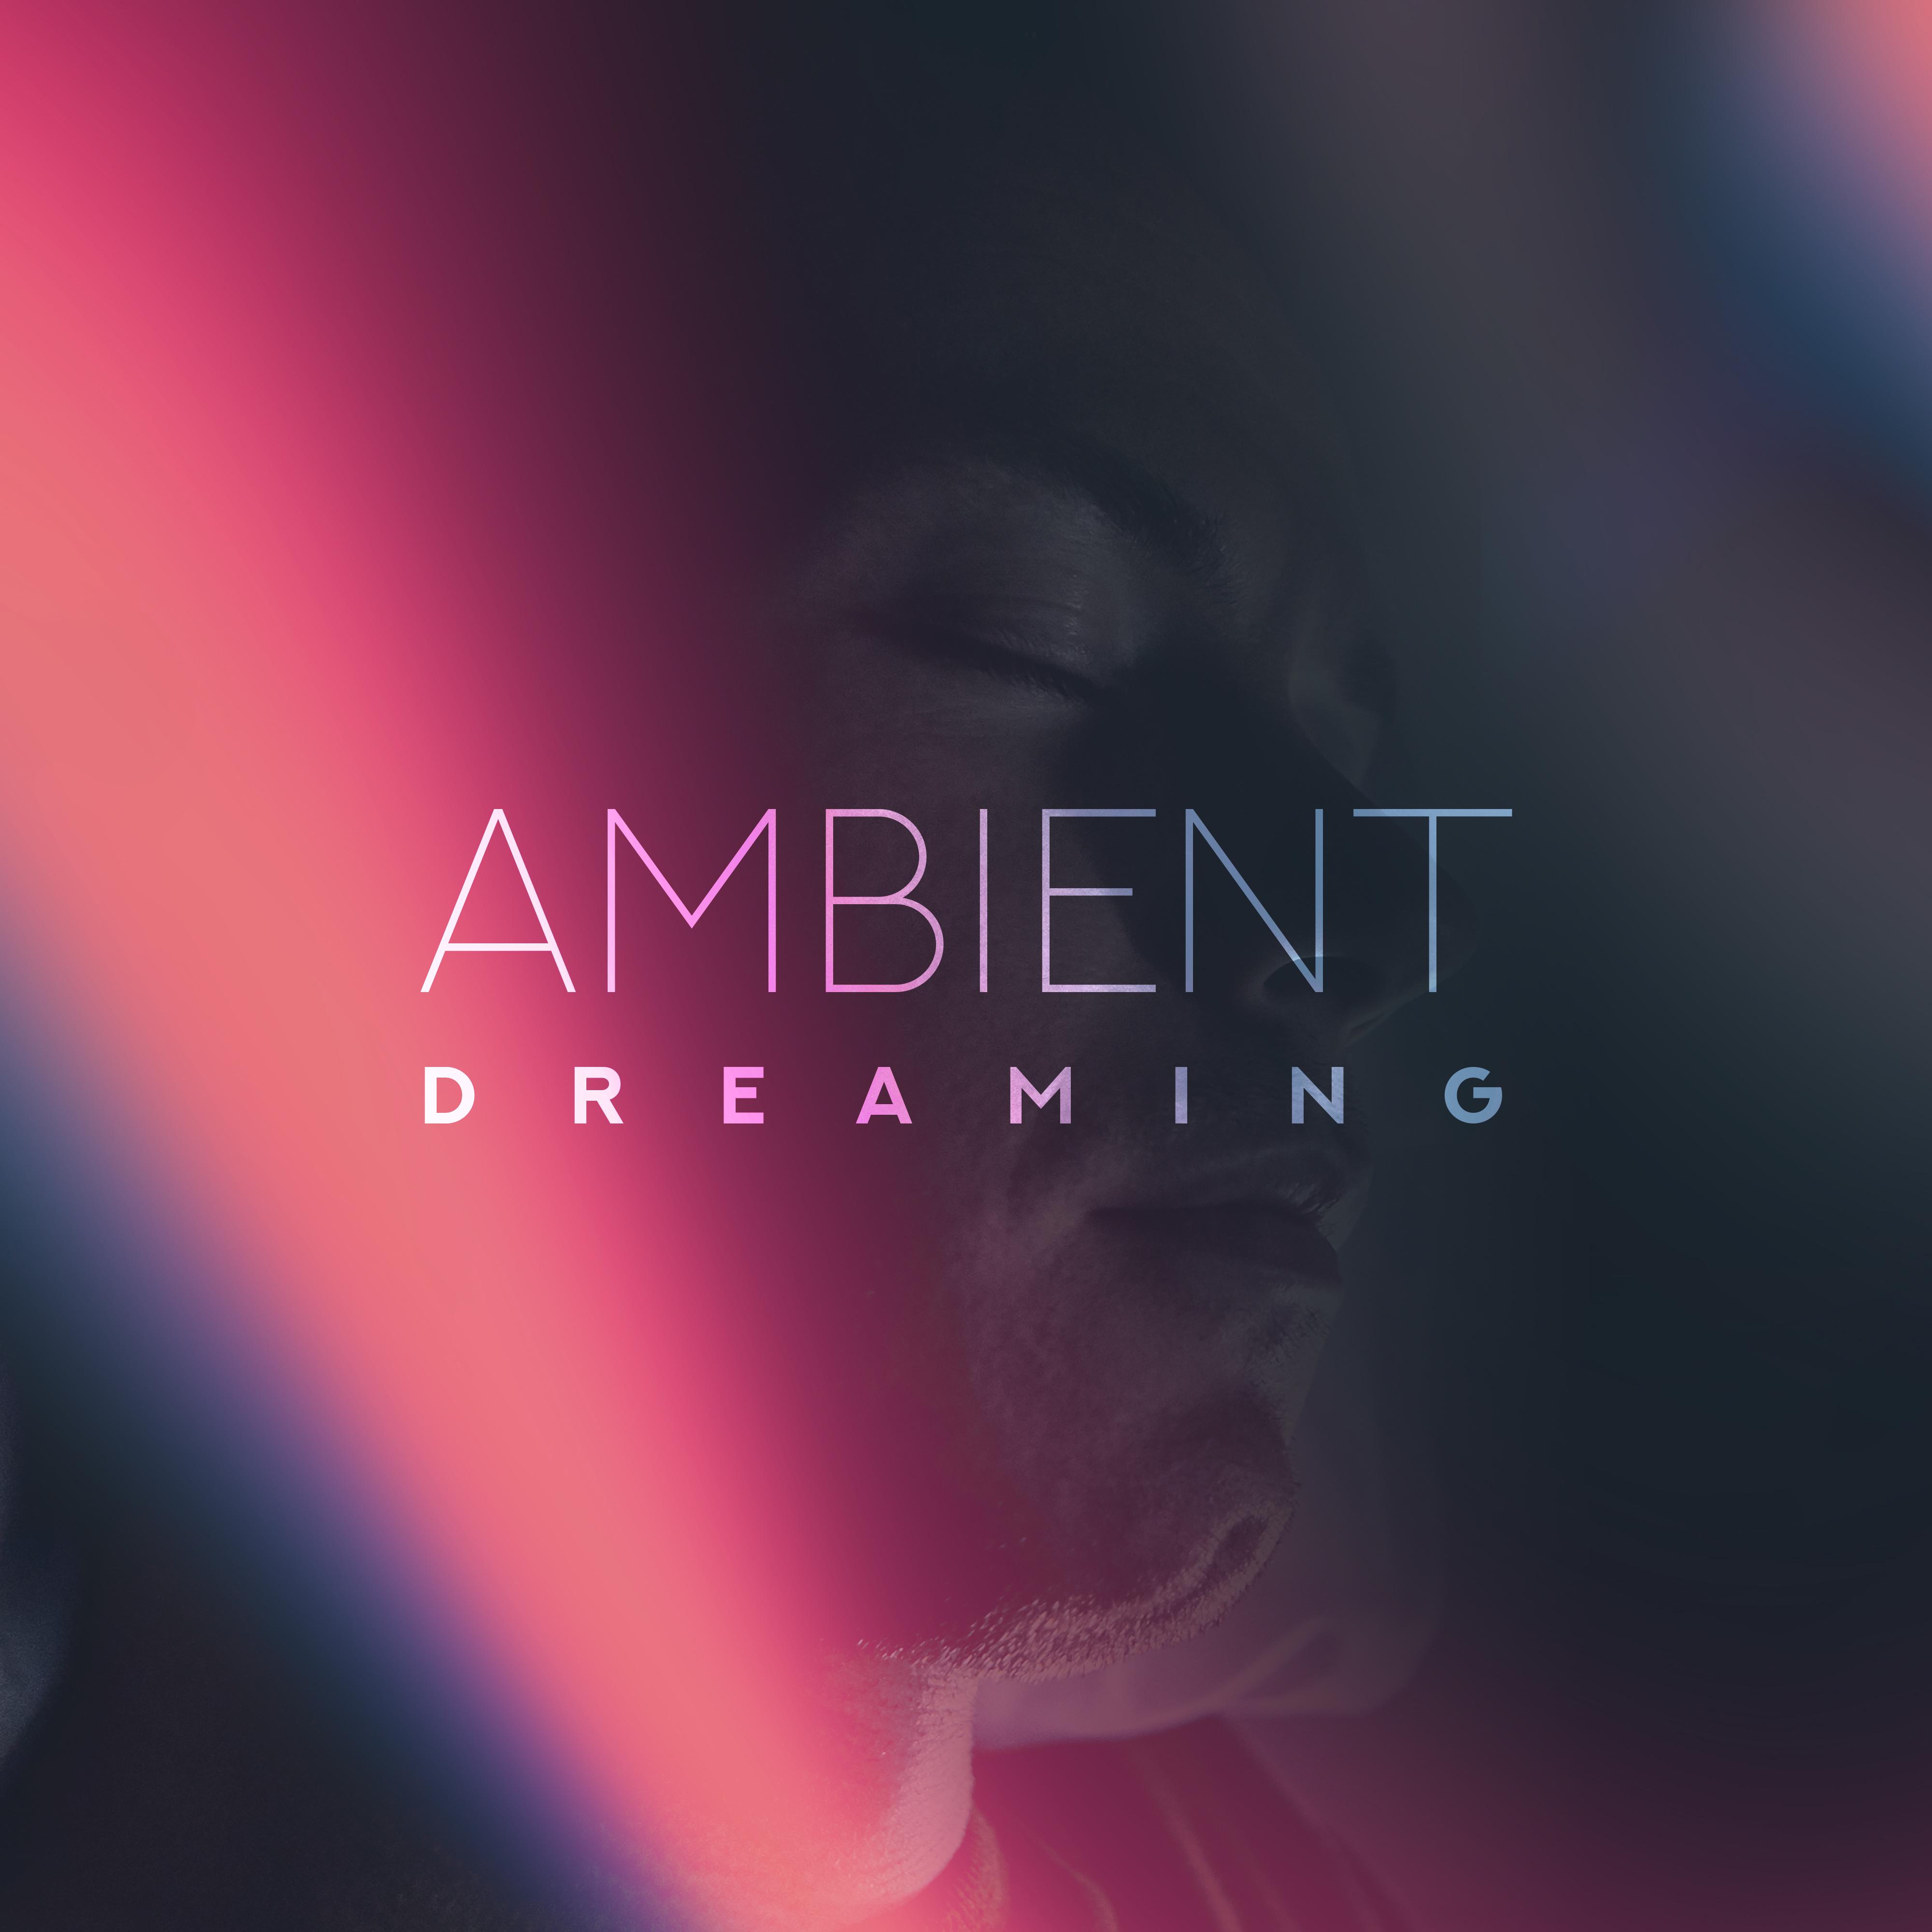 Ambient Dreaming: Relaxing Melodies to Sleep, Ambient Music for Sleep Problems and Insomnia, Deeply Relaxing Bedtime Sounds